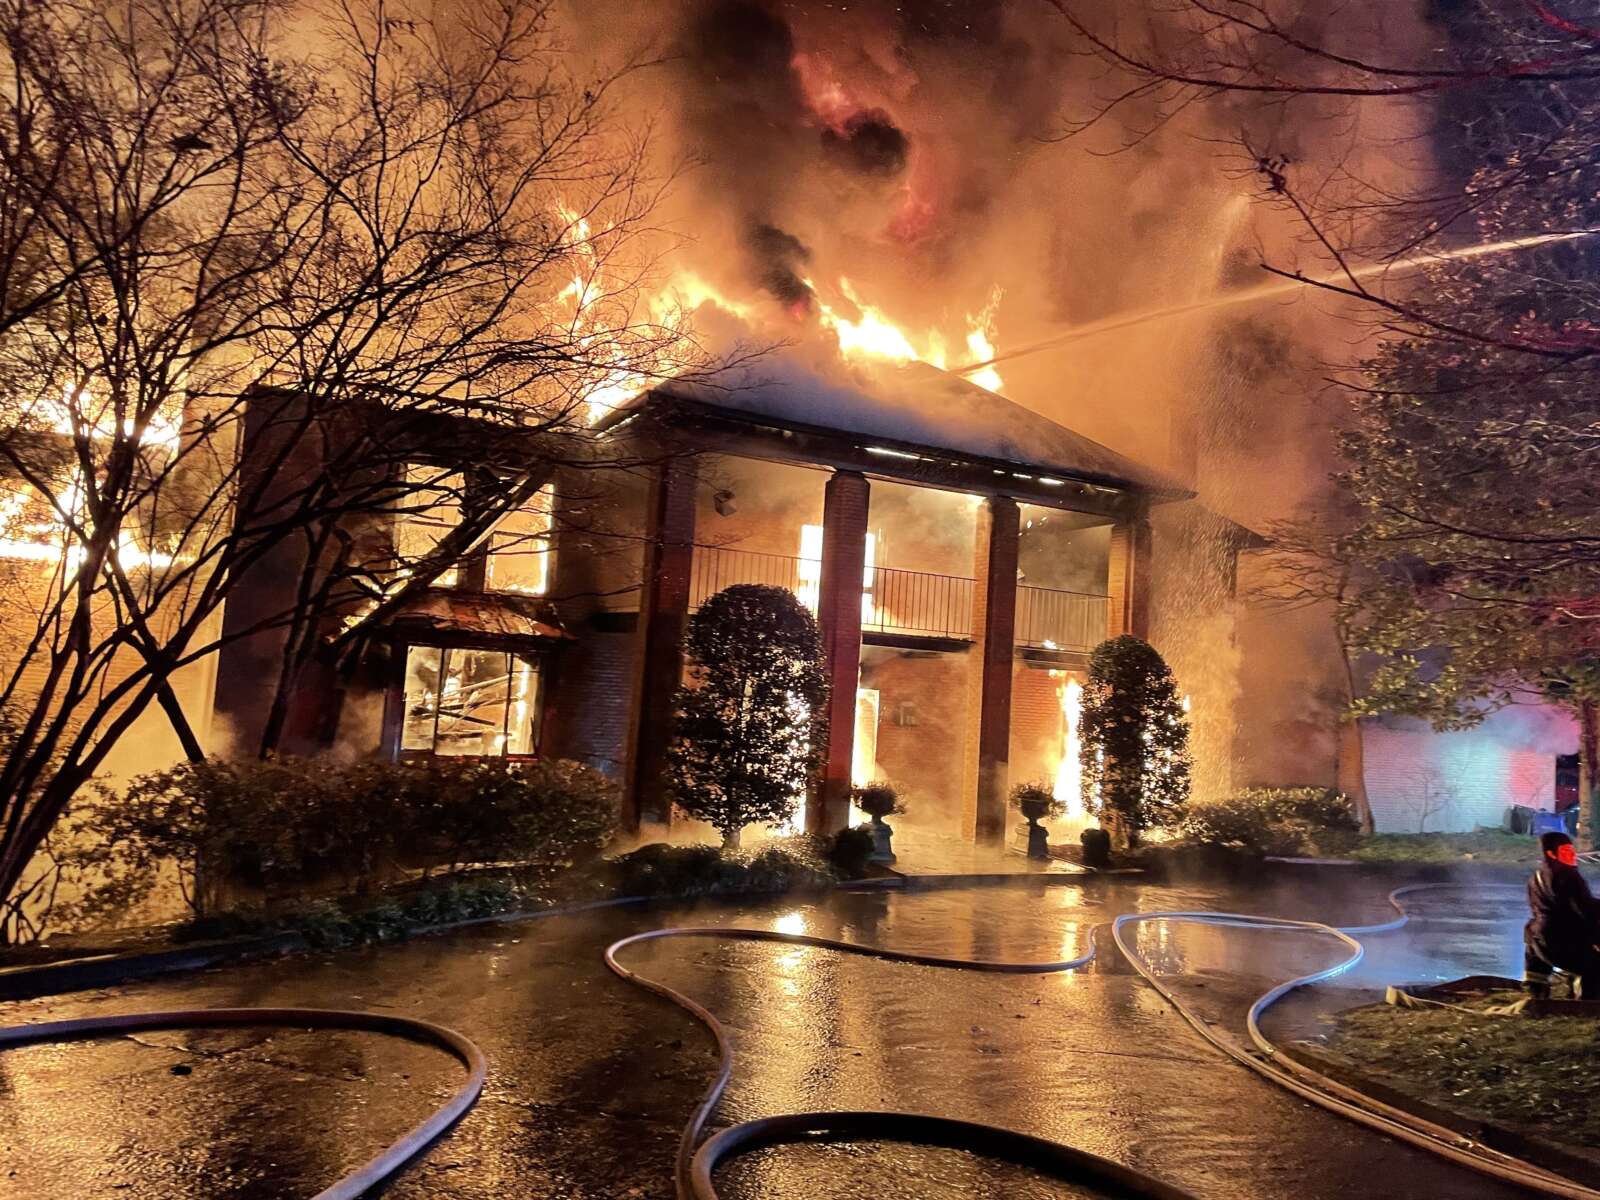 UPDATED: Route 123 reopens after fire burns down former governor’s McLean mansion